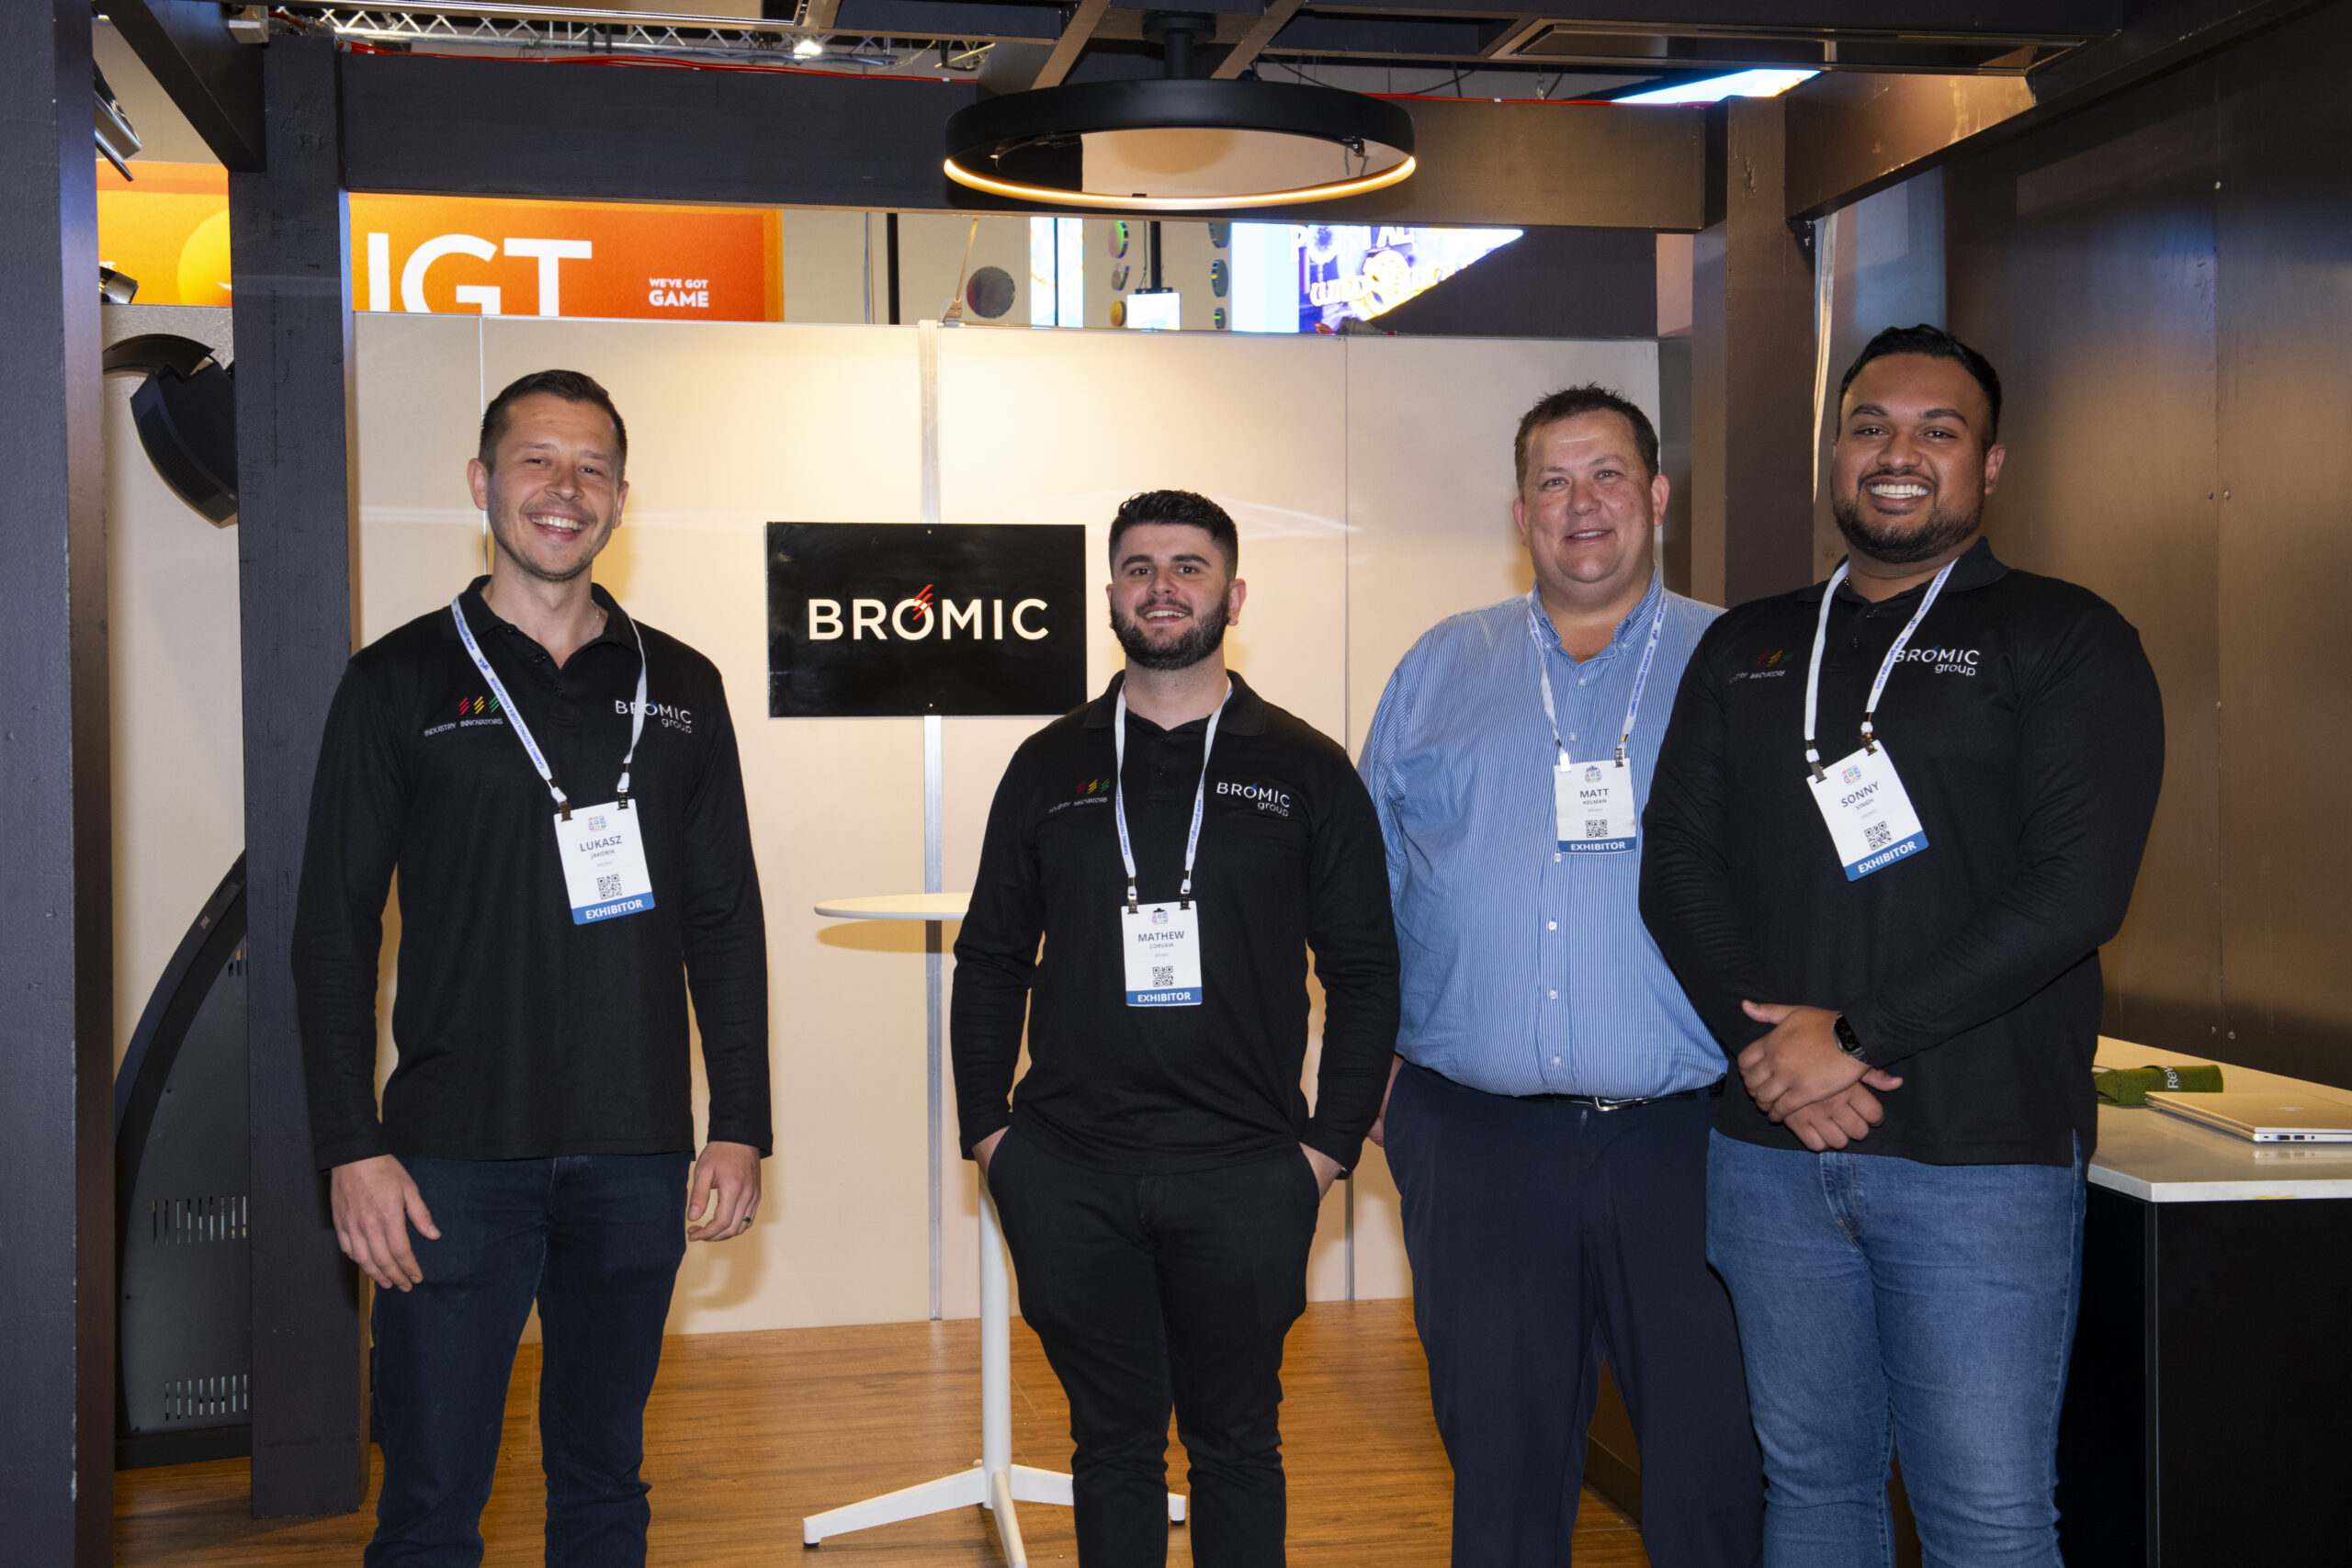 Bromic staff at Heating trade show